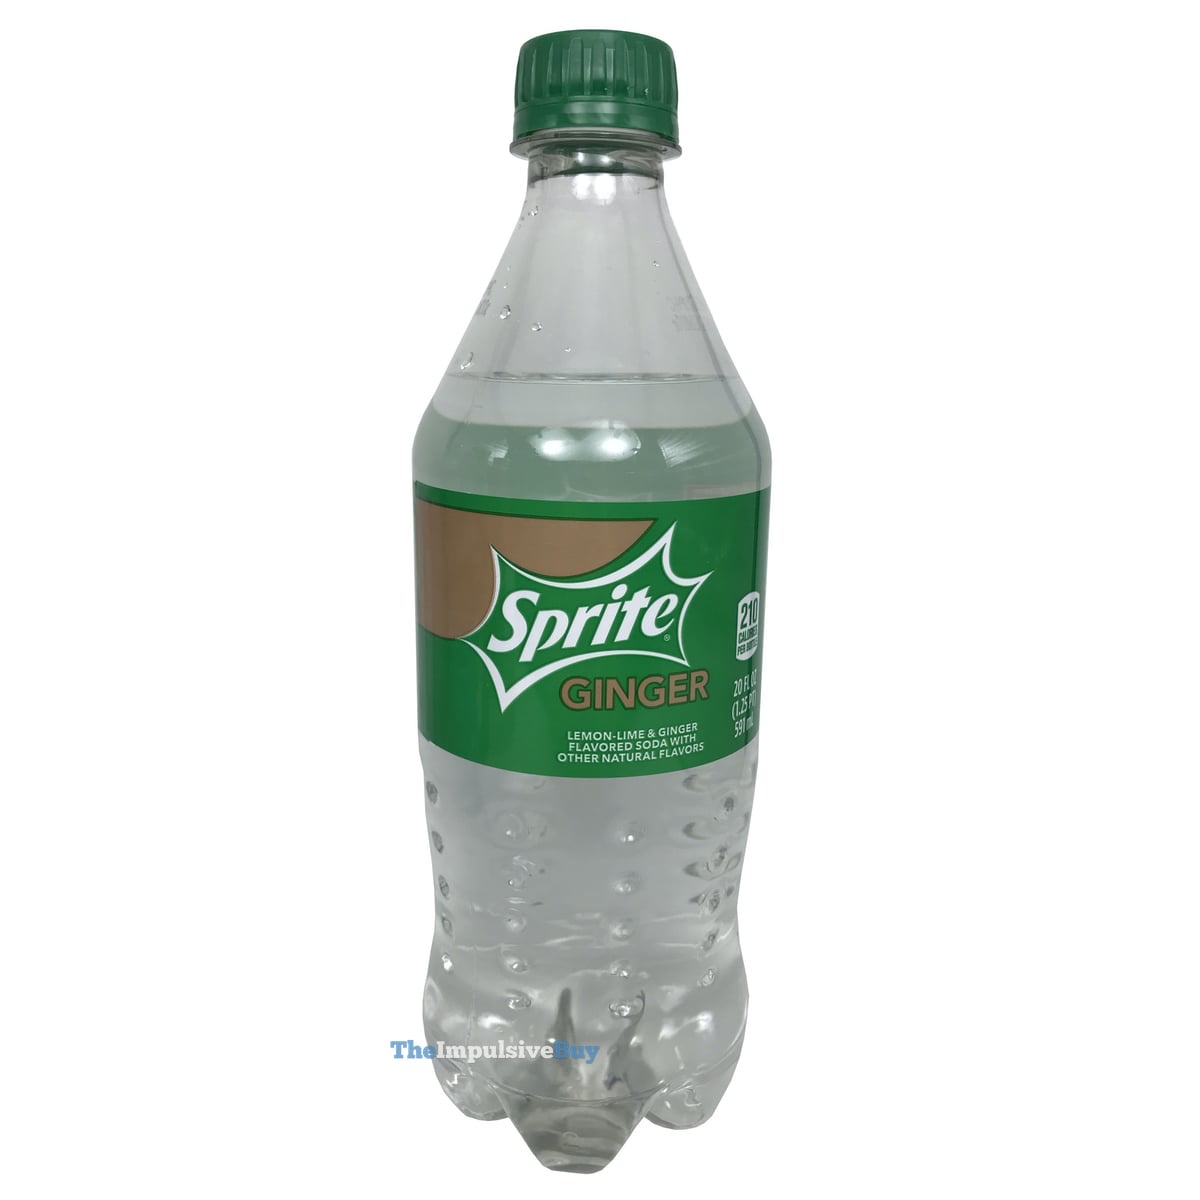 REVIEW: Sprite Ginger - The Impulsive Buy